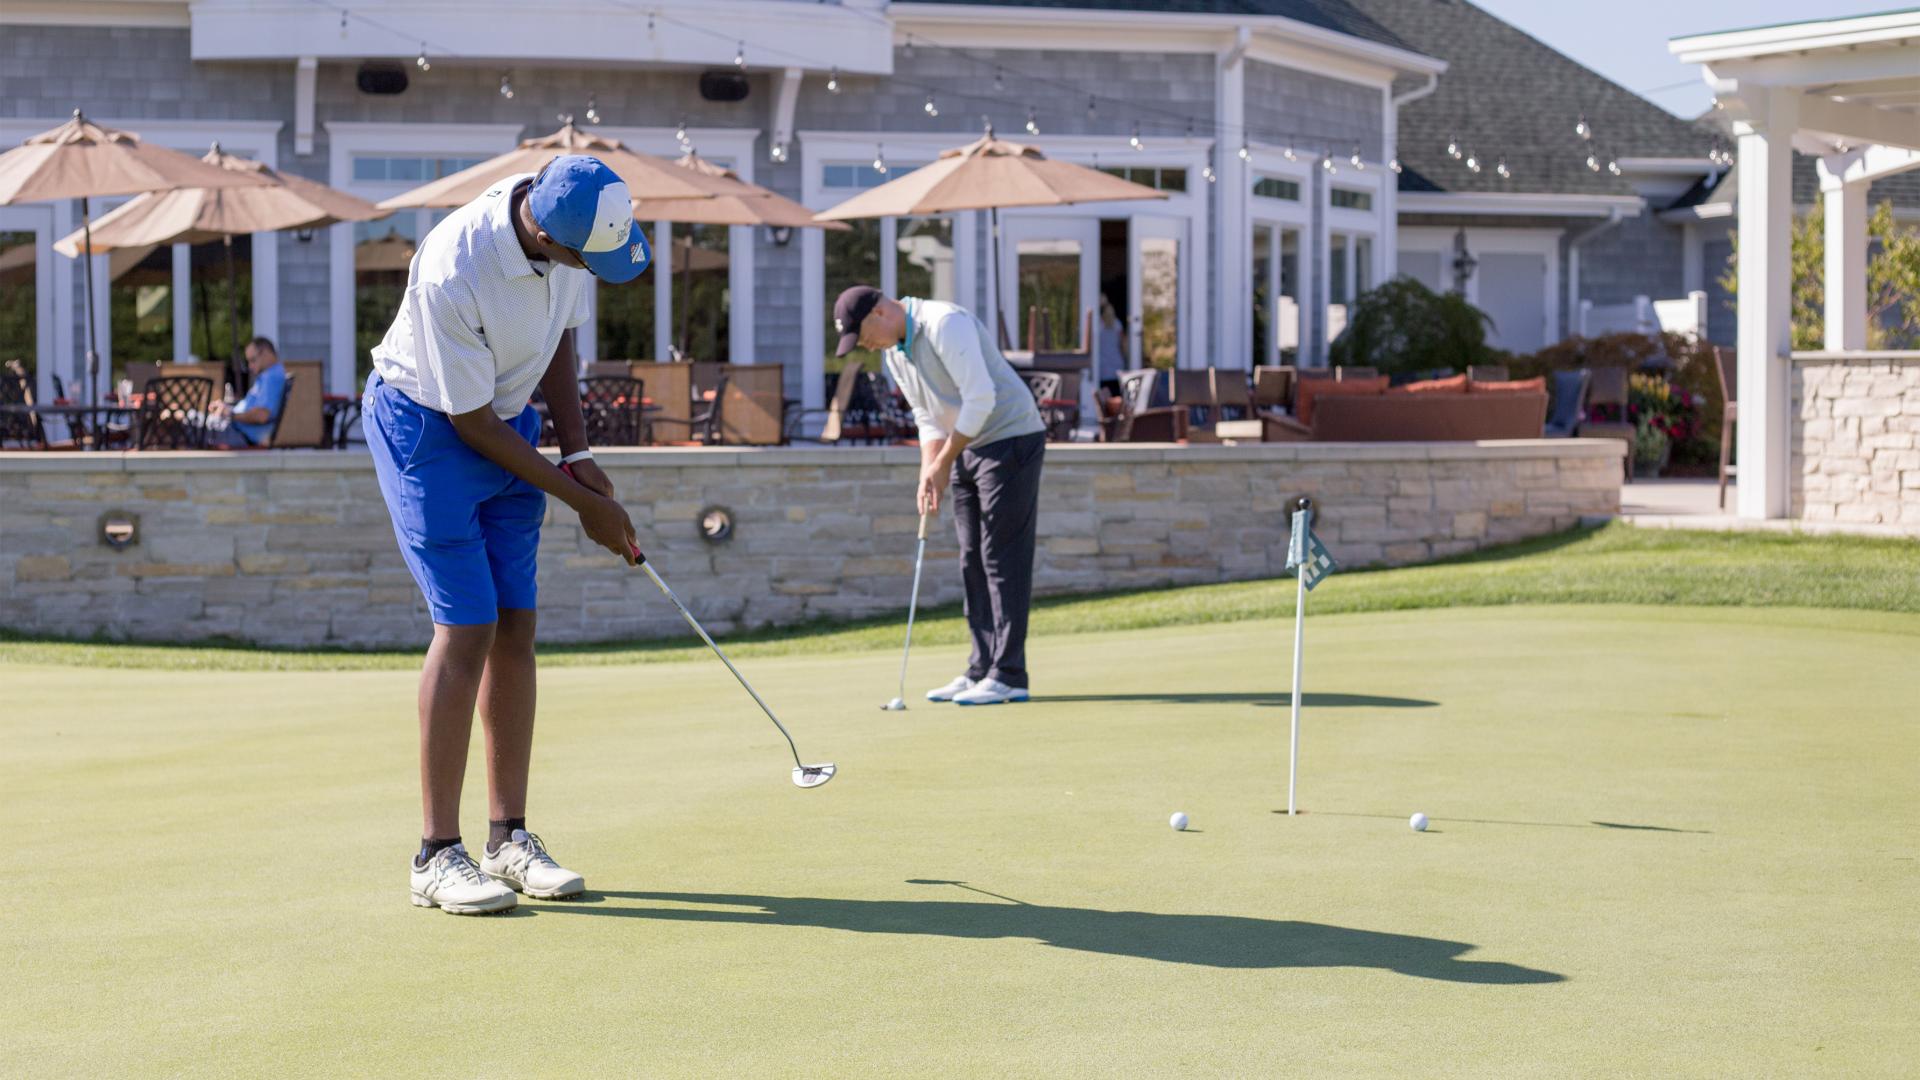 Two men using the putting green at Harbor Shores Golf Course